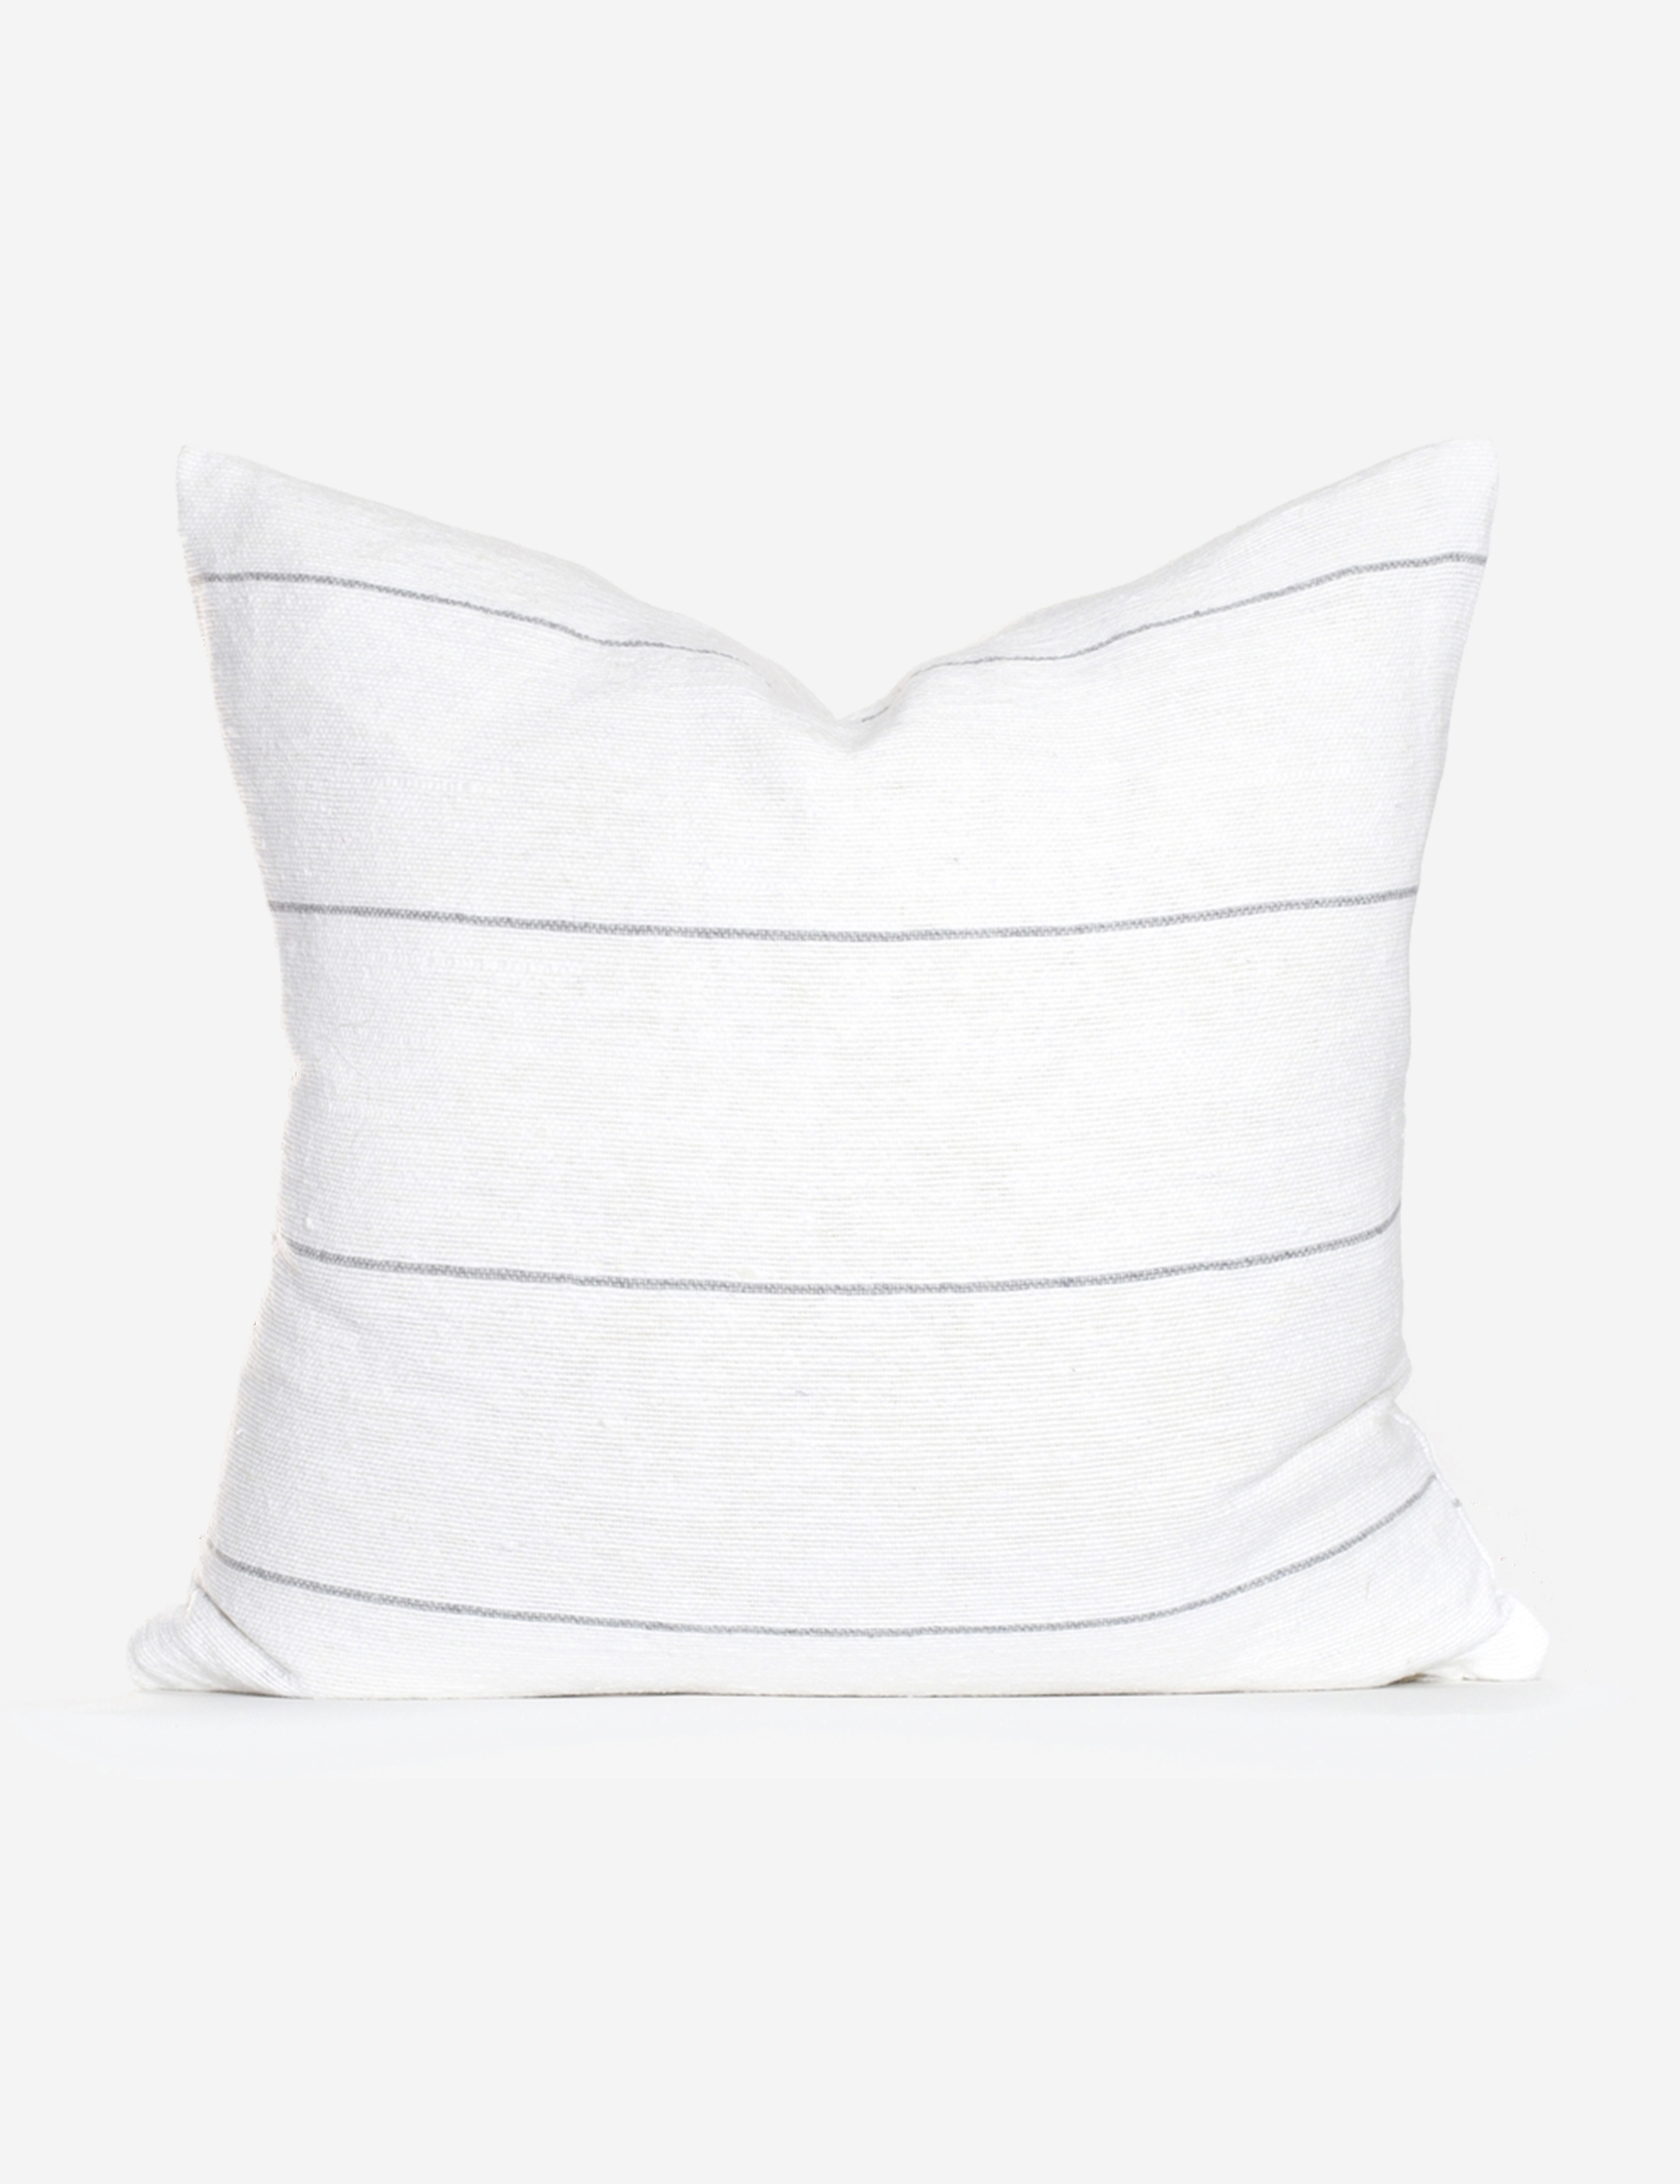 Payden Linen Pillow, White and Gray - Lulu and Georgia